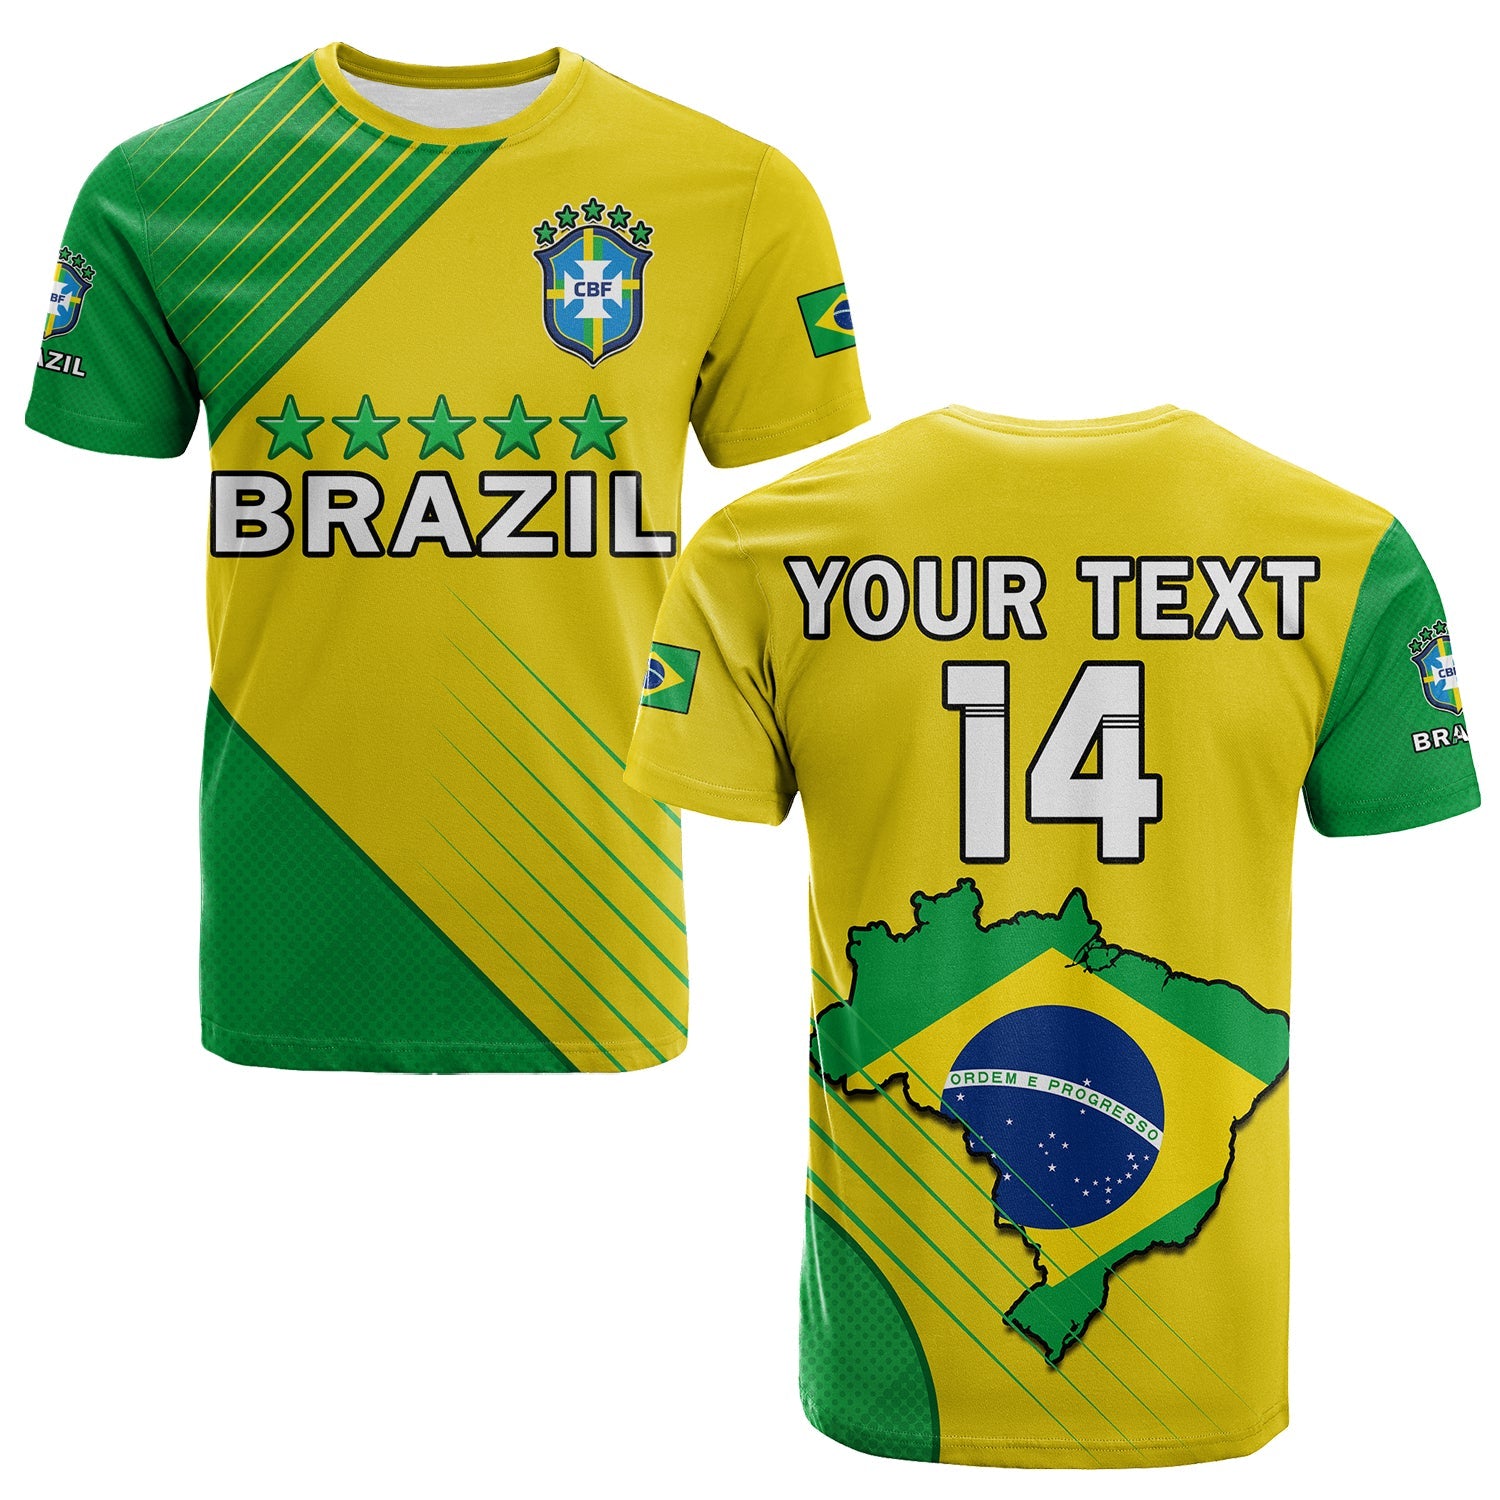 custom-text-and-number-brazil-football-t-shirt-brasil-map-come-on-canarinho-sporty-style